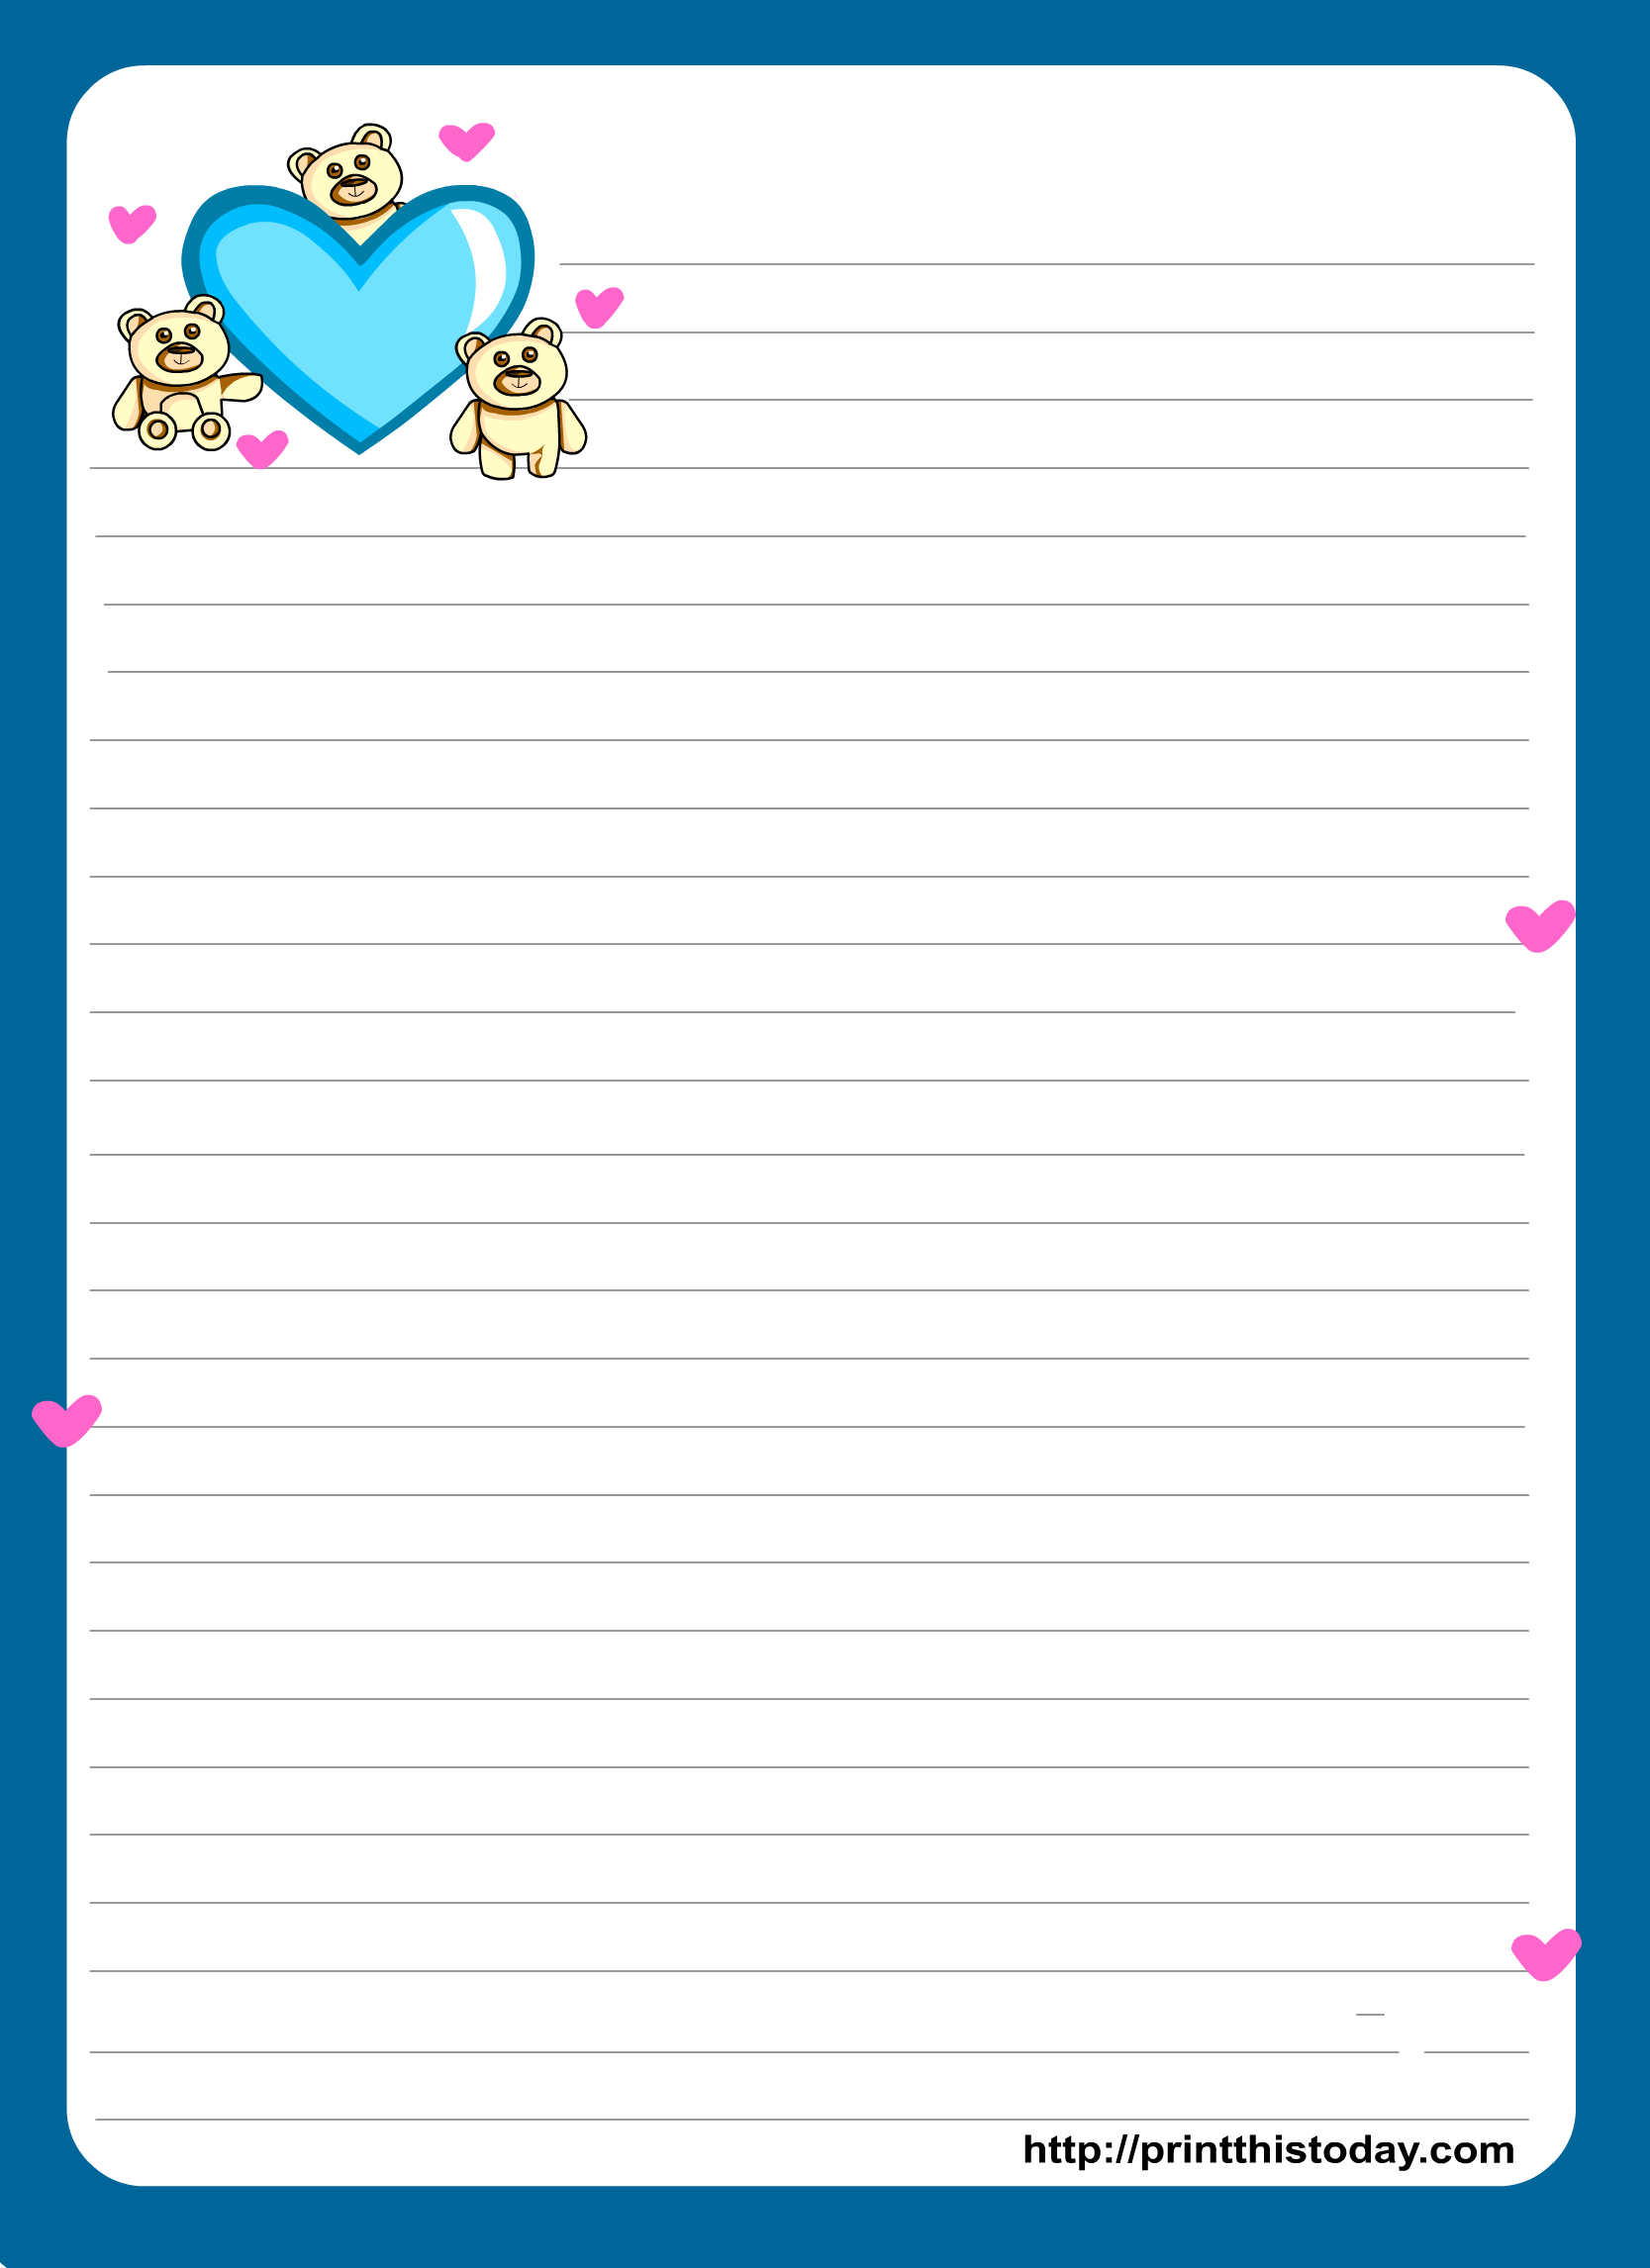 Love Letter Pad Stationery Free Printable Stationery Printable 